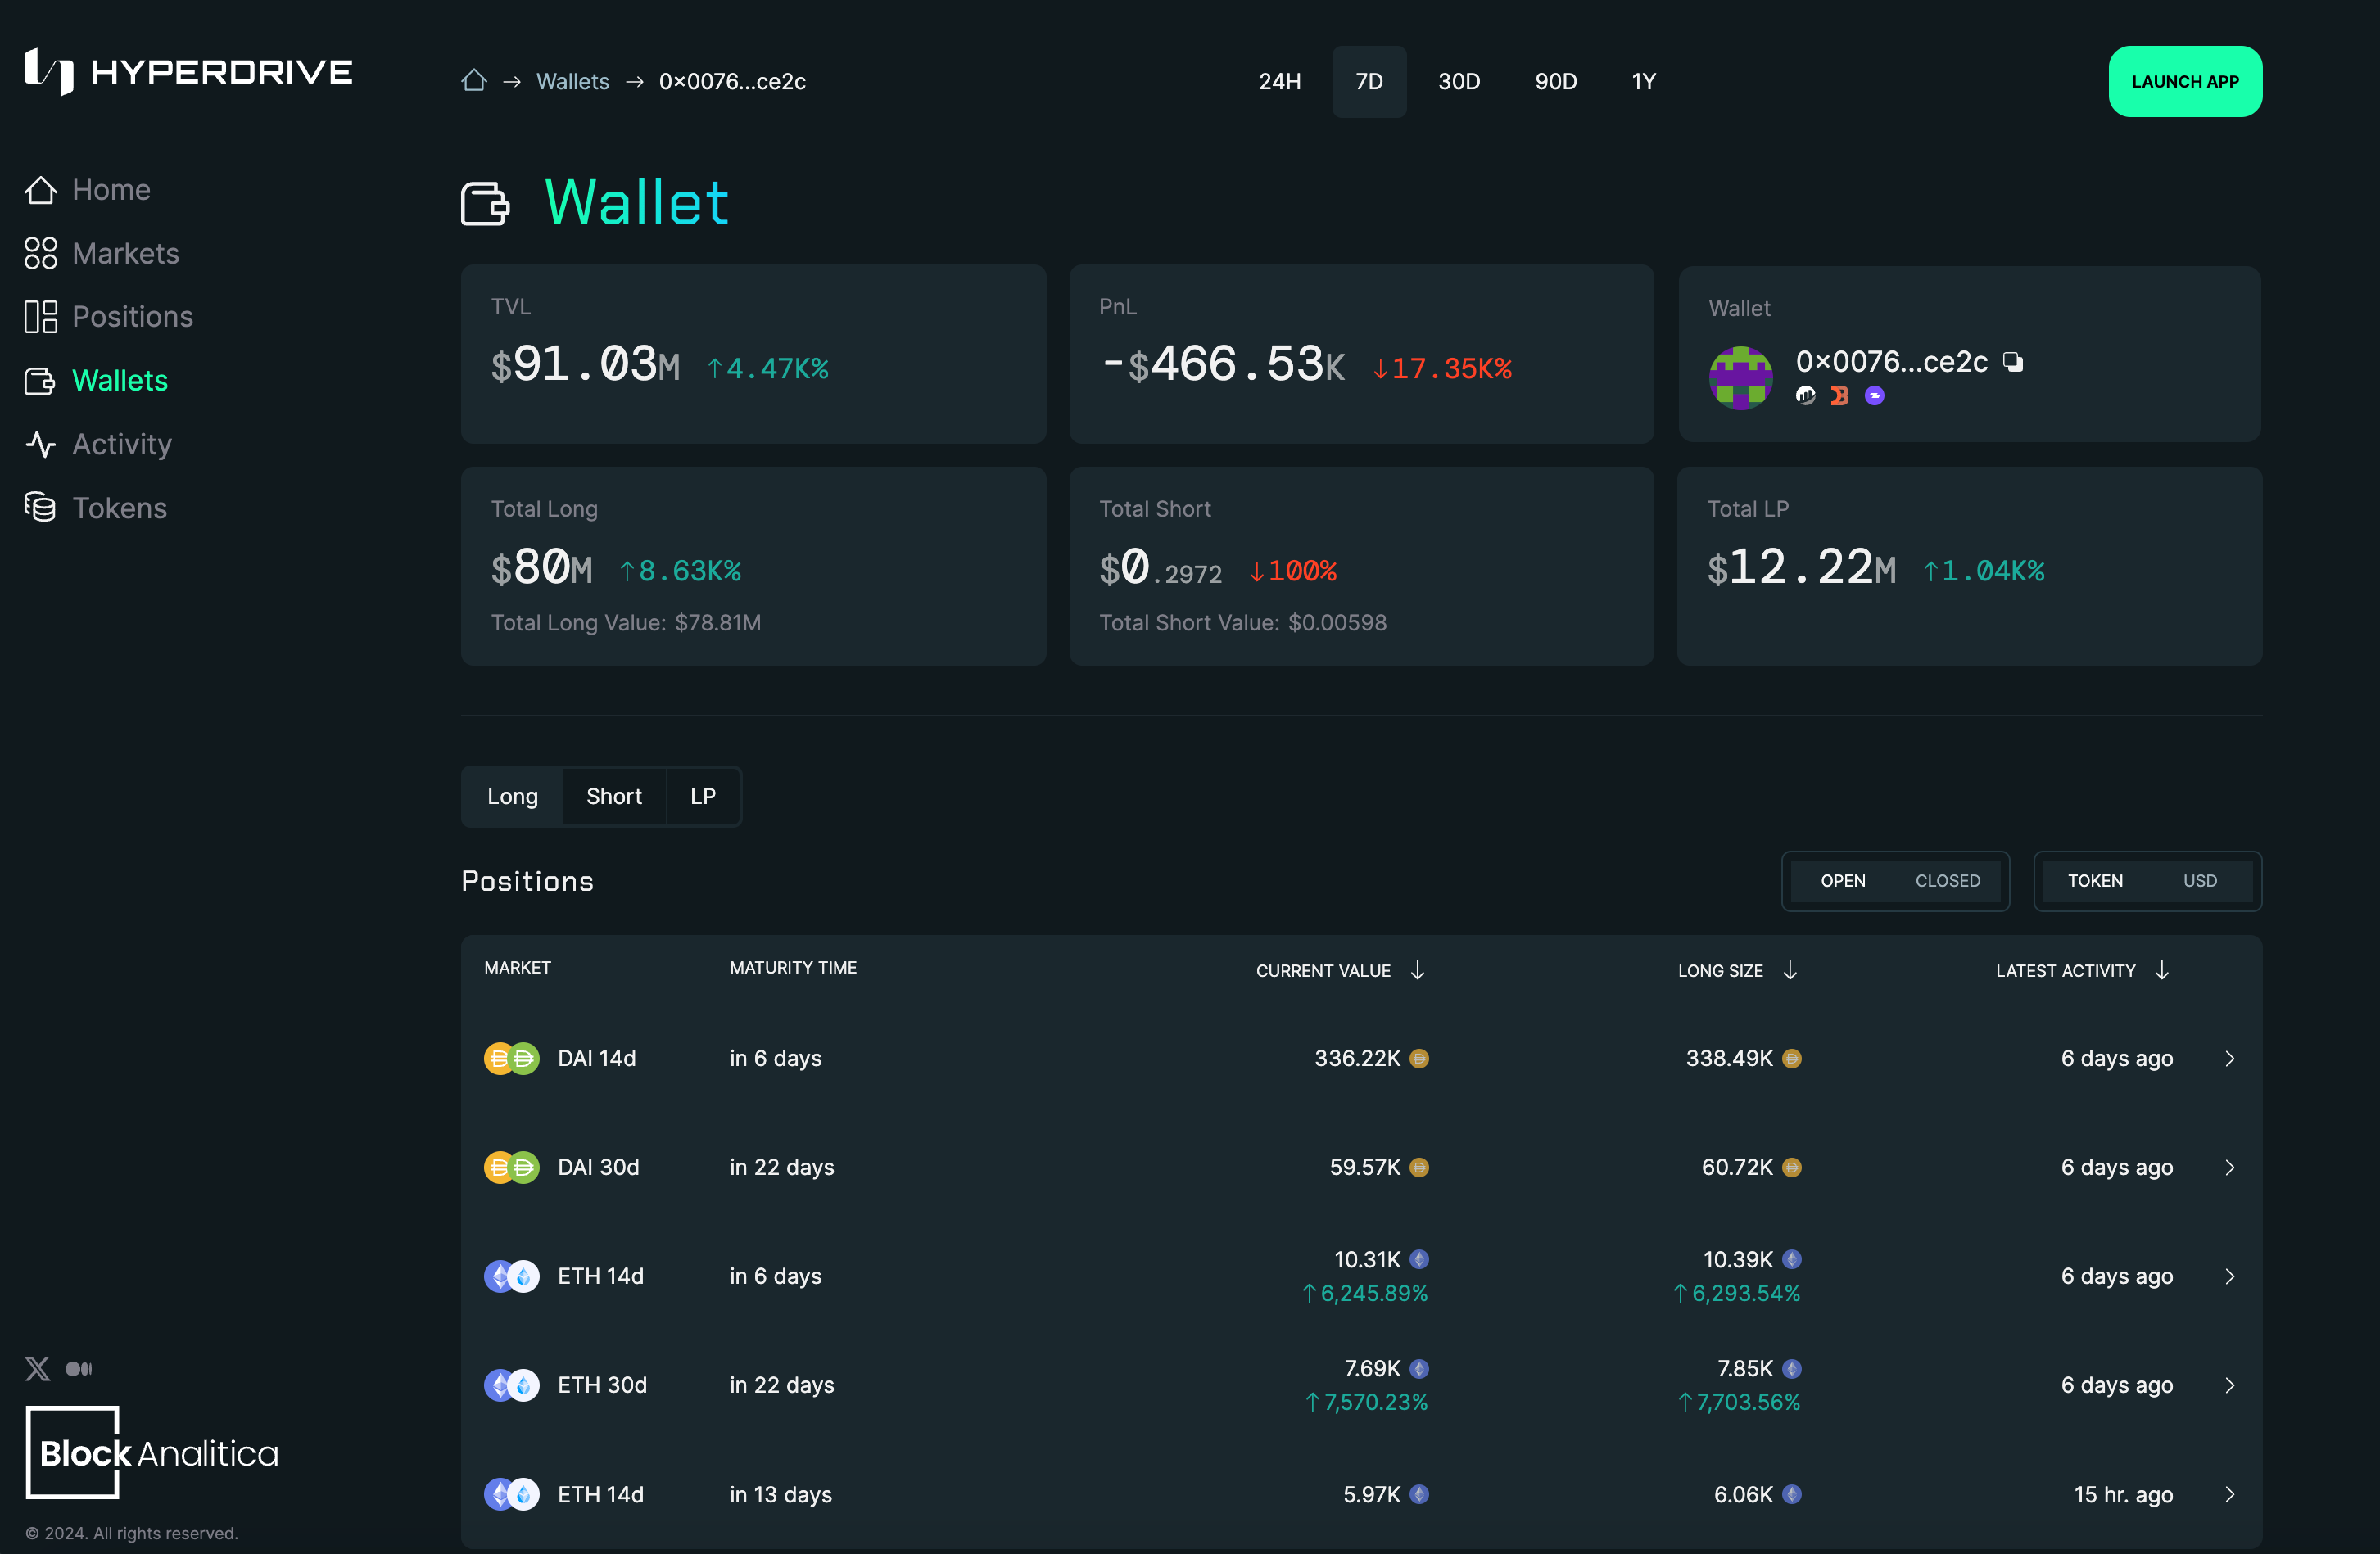 Introducing the Hyperdrive Analytics Dashboard